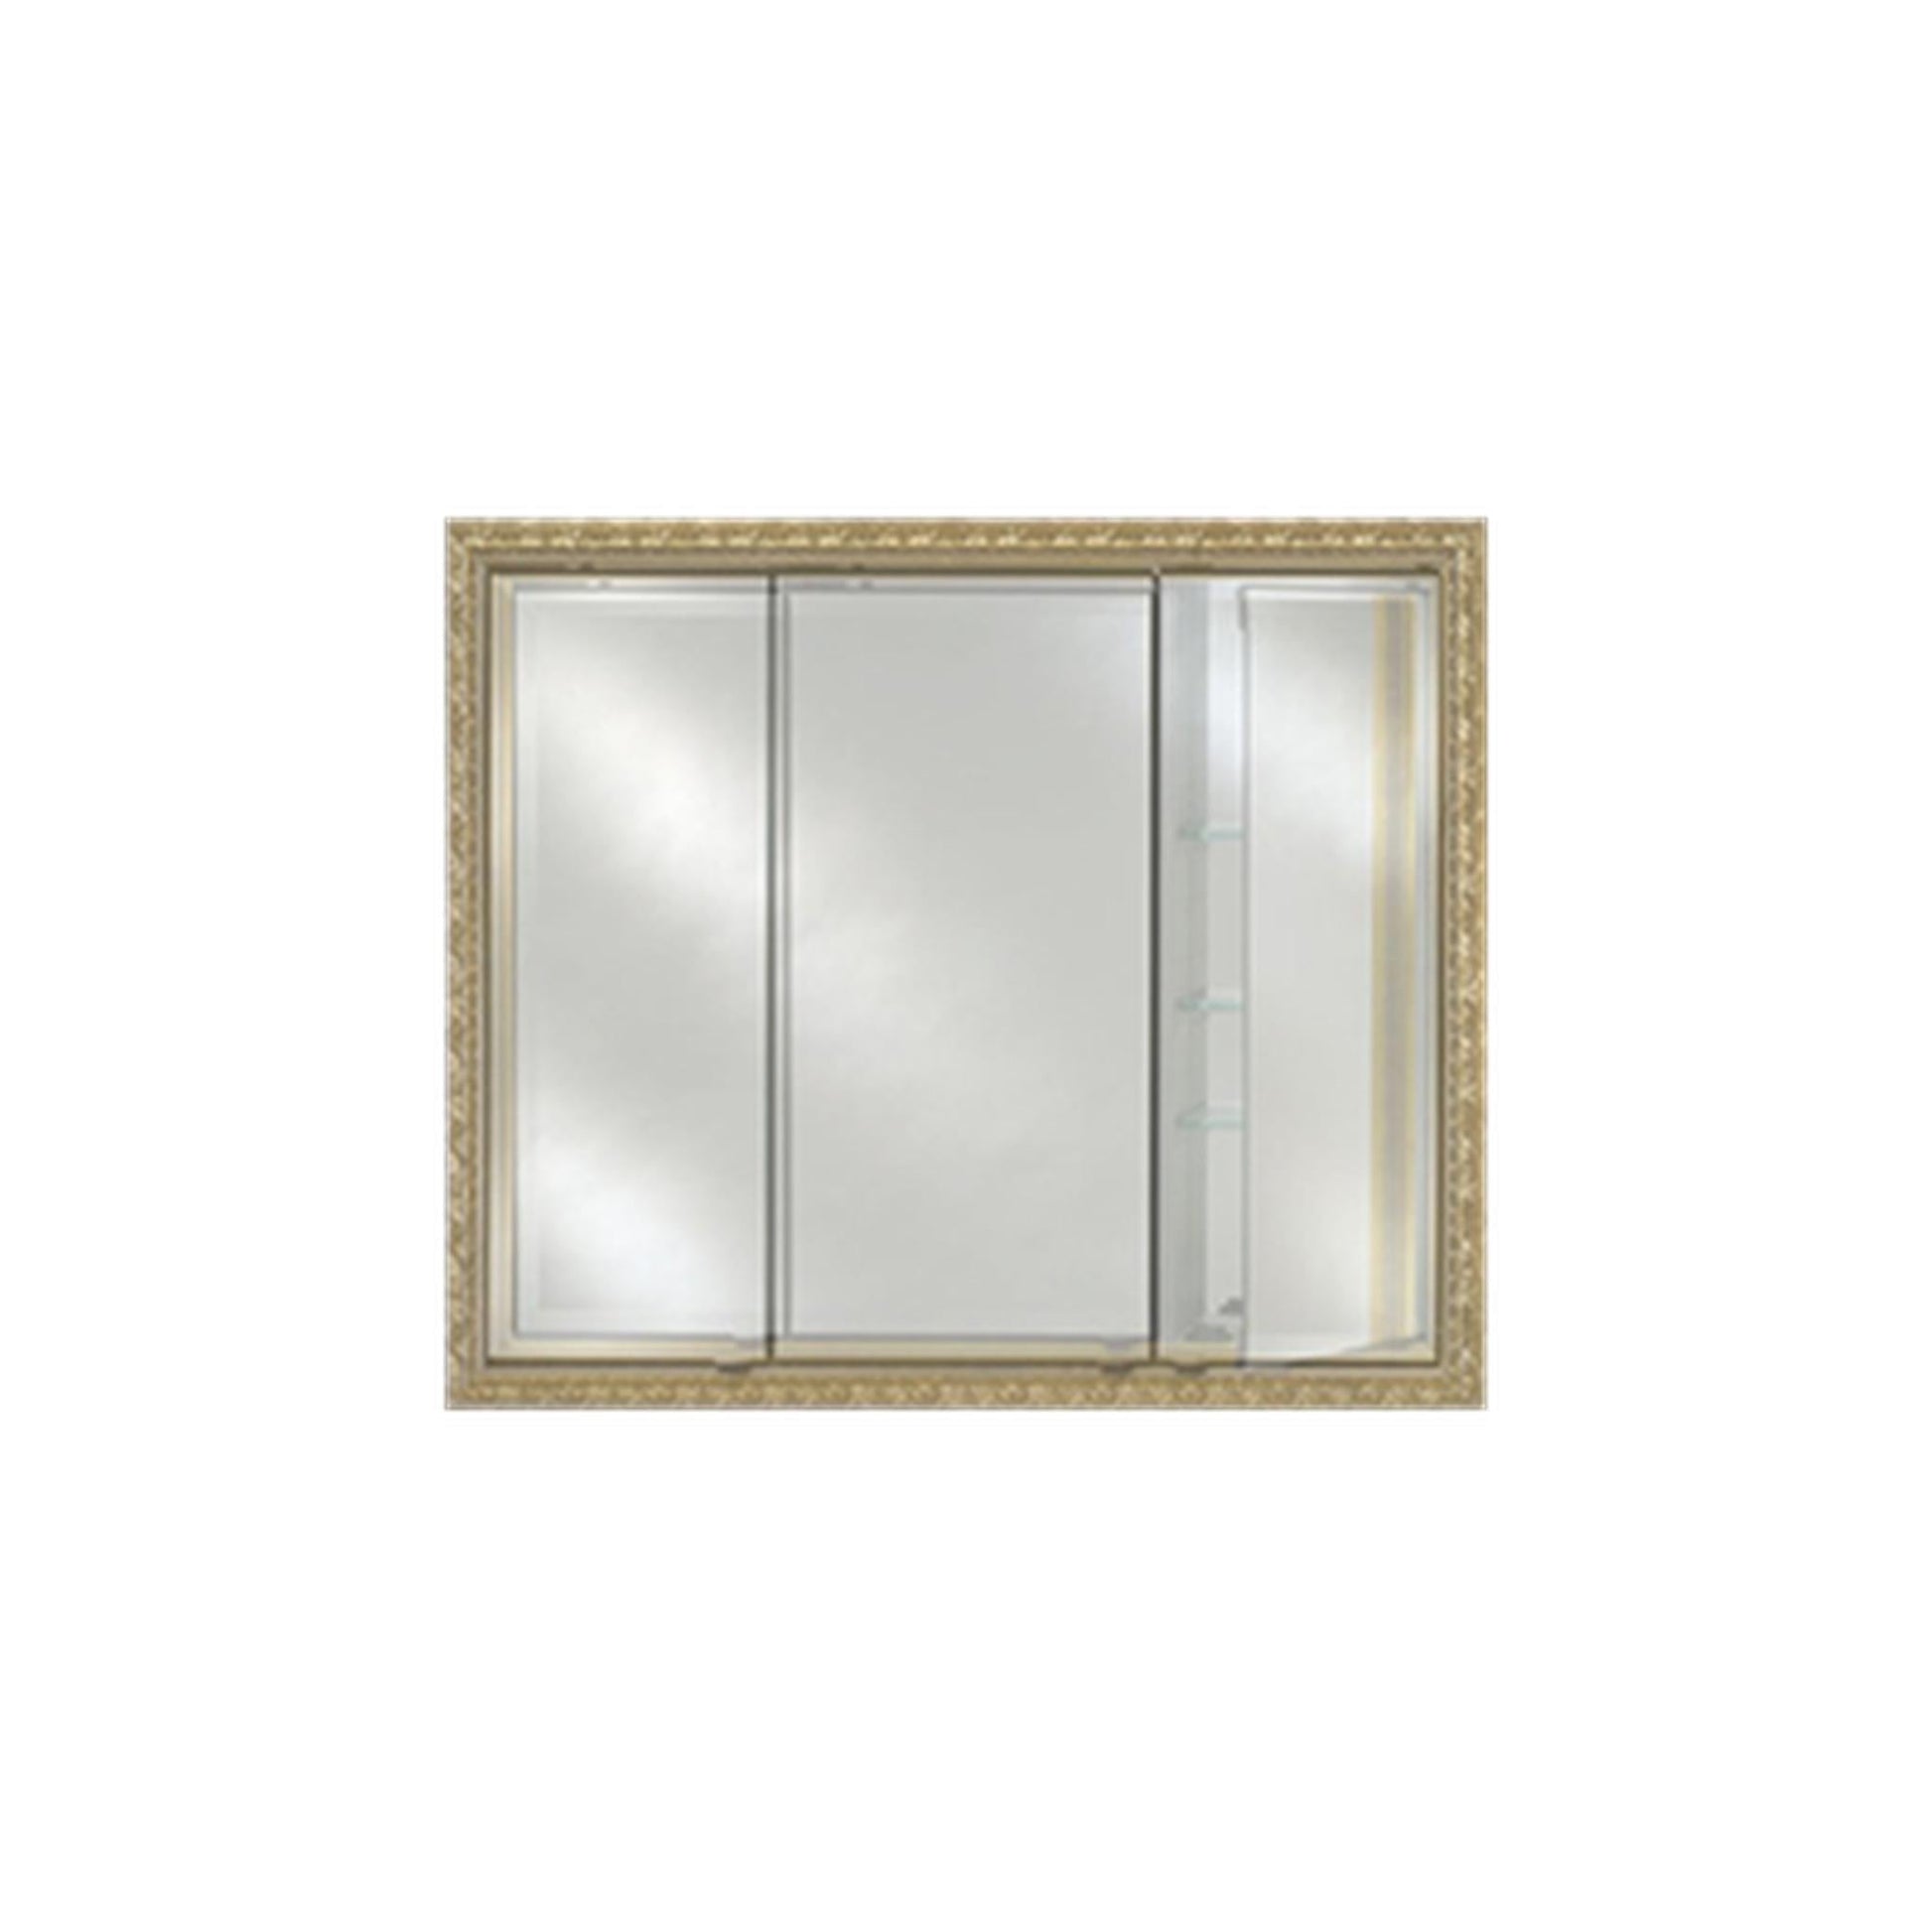 Afina Signature 47" x 36" Polished Glimmer-Scallop Recessed Triple Door Medicine Cabinet With Beveled Edge Mirror